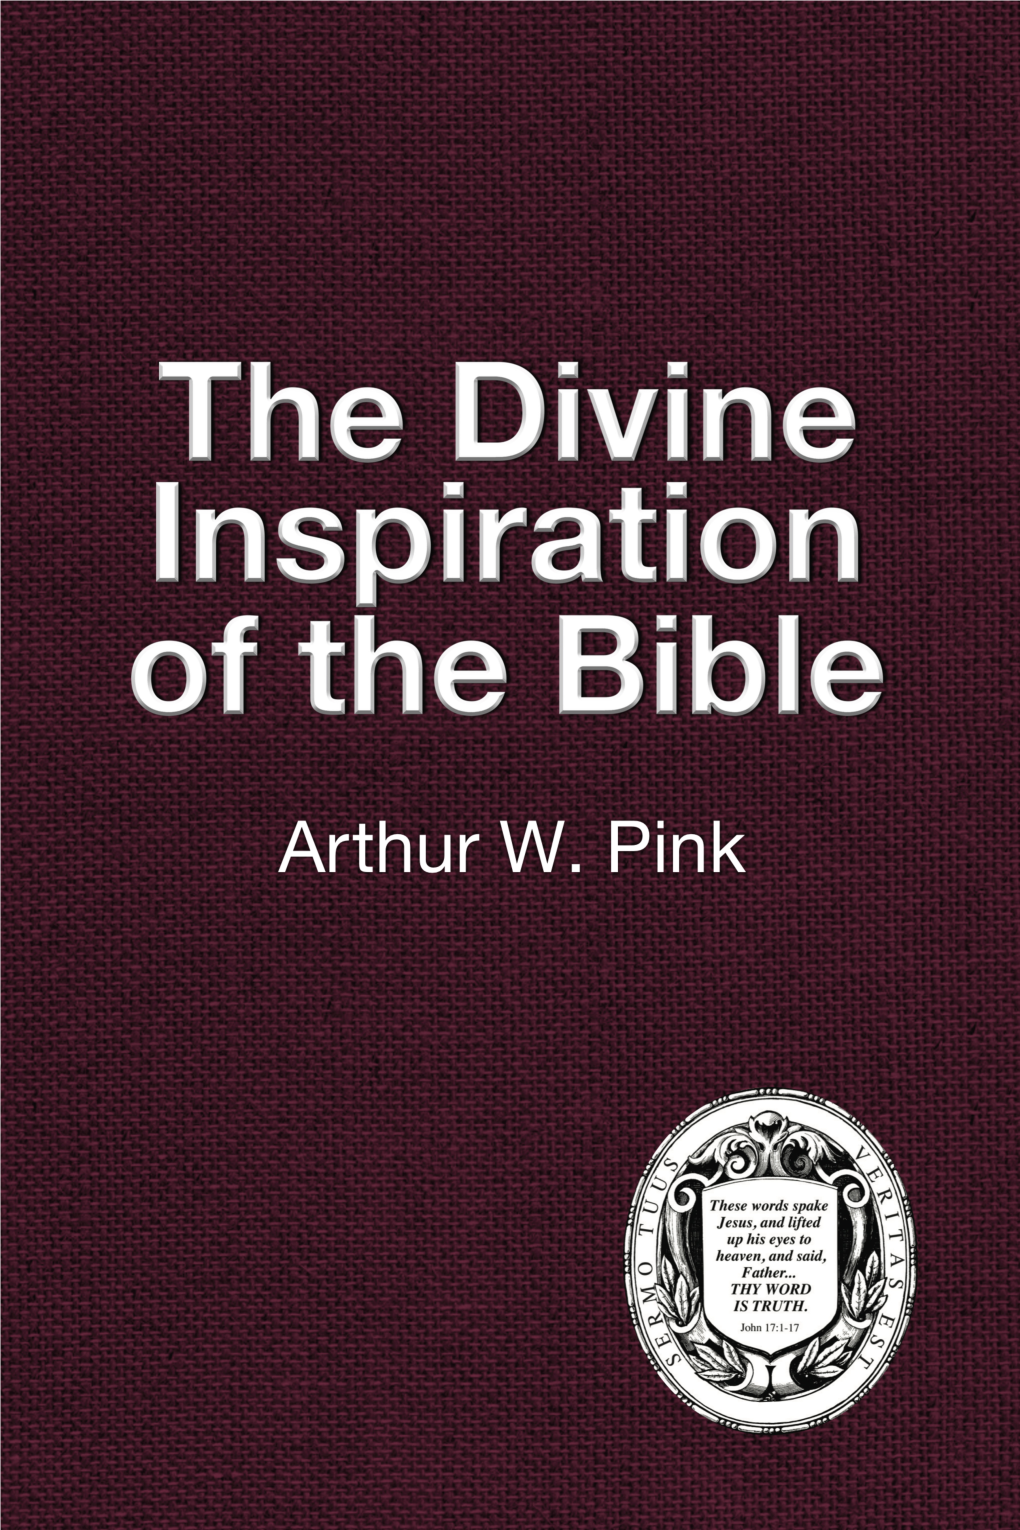 9781579786540 the Divine Inspiration of the Bible.Pdf